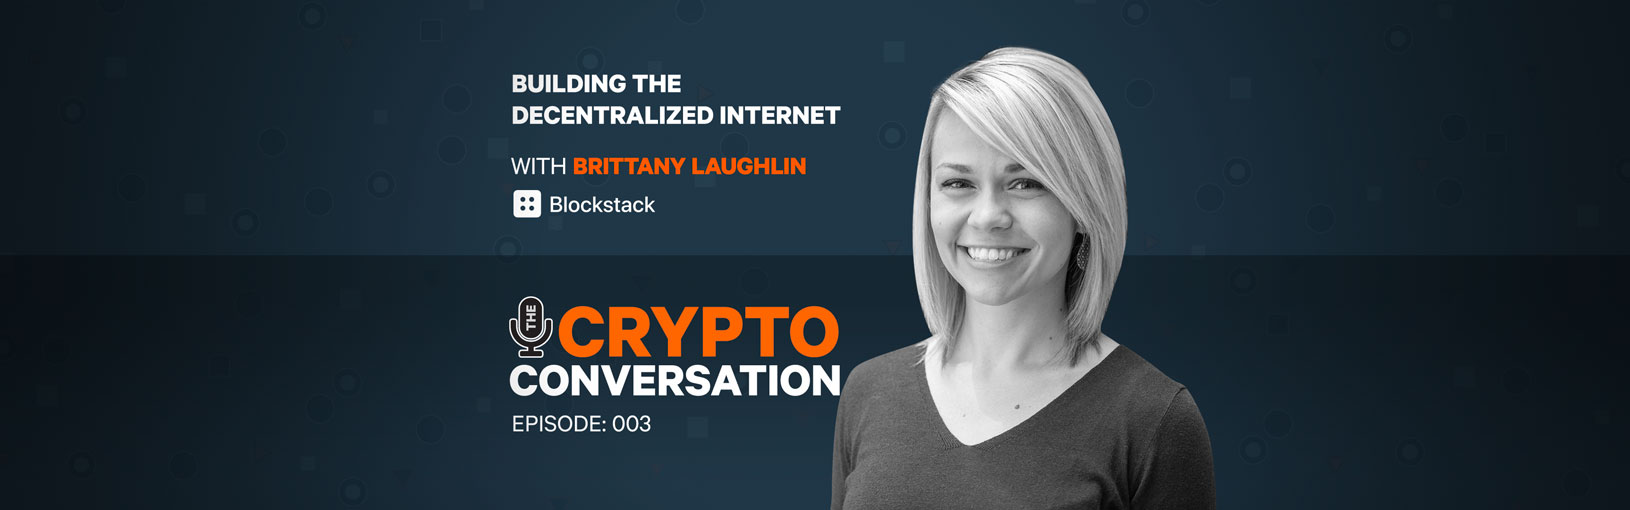 Building the Decentralized Internet with Brittany Laughlin from Blockstack